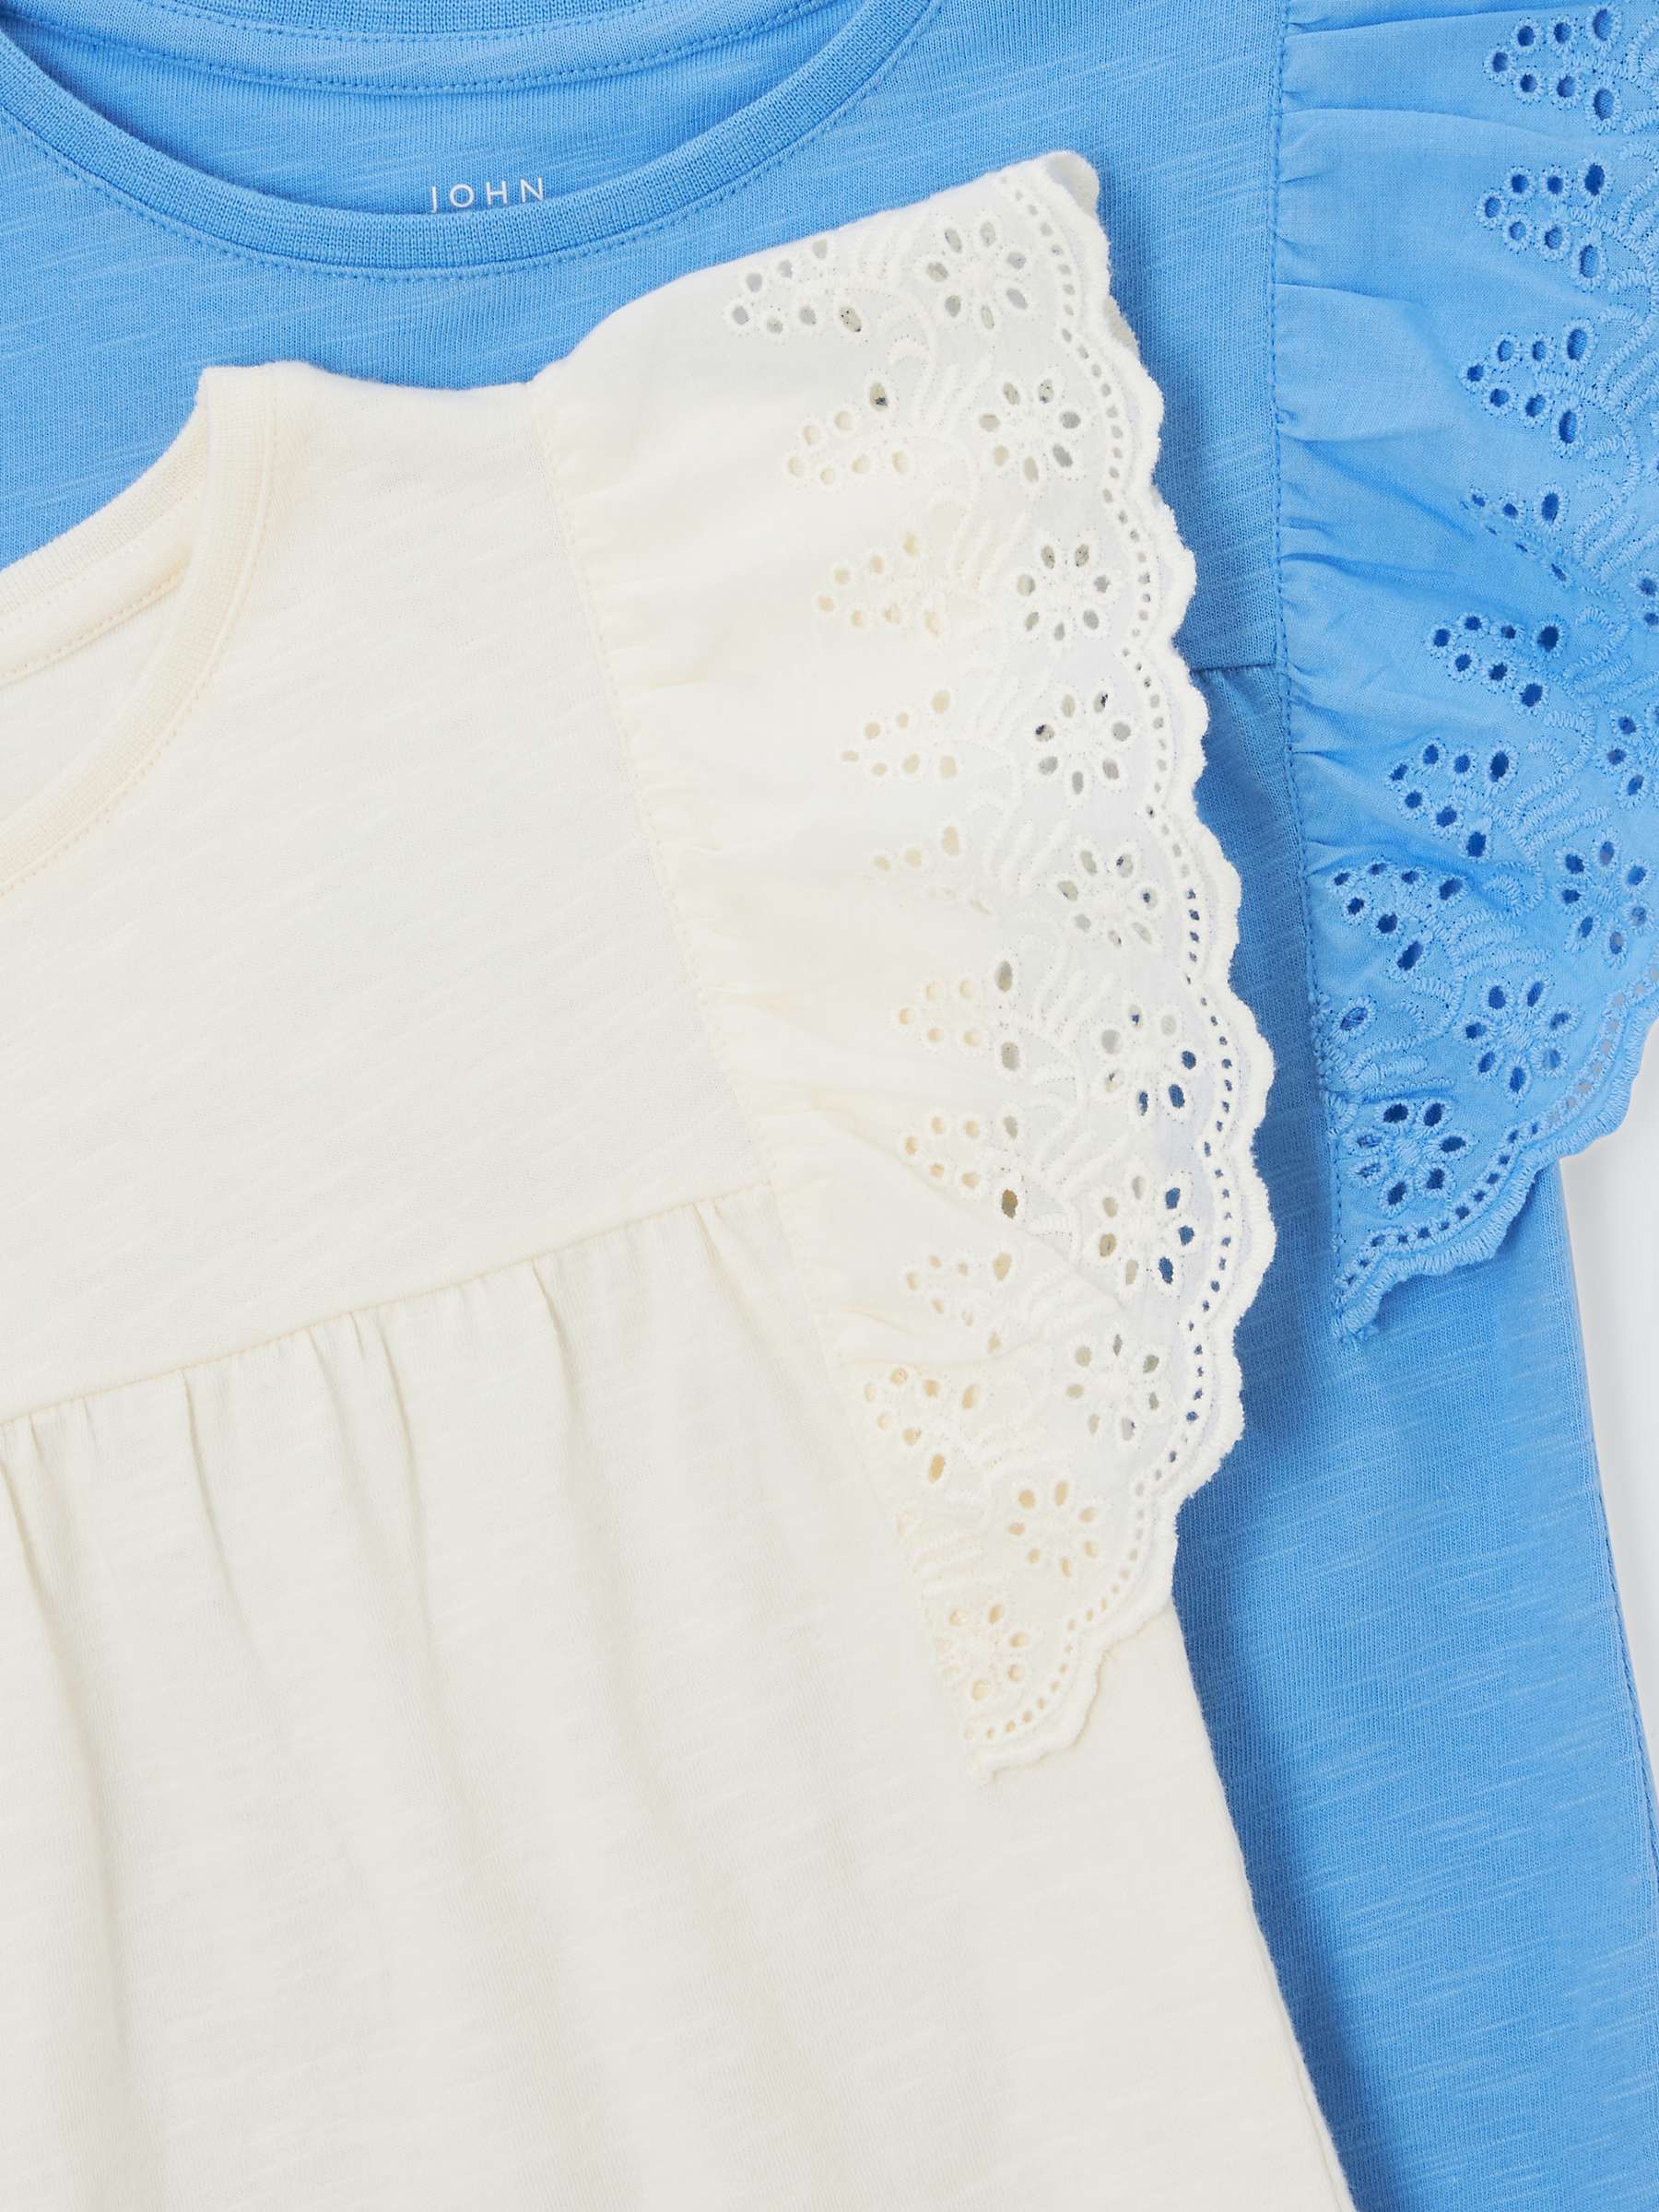 Buy John Lewis Kids' Broderie Anglaise Sleeve Tops, Pack of 2 Online at johnlewis.com